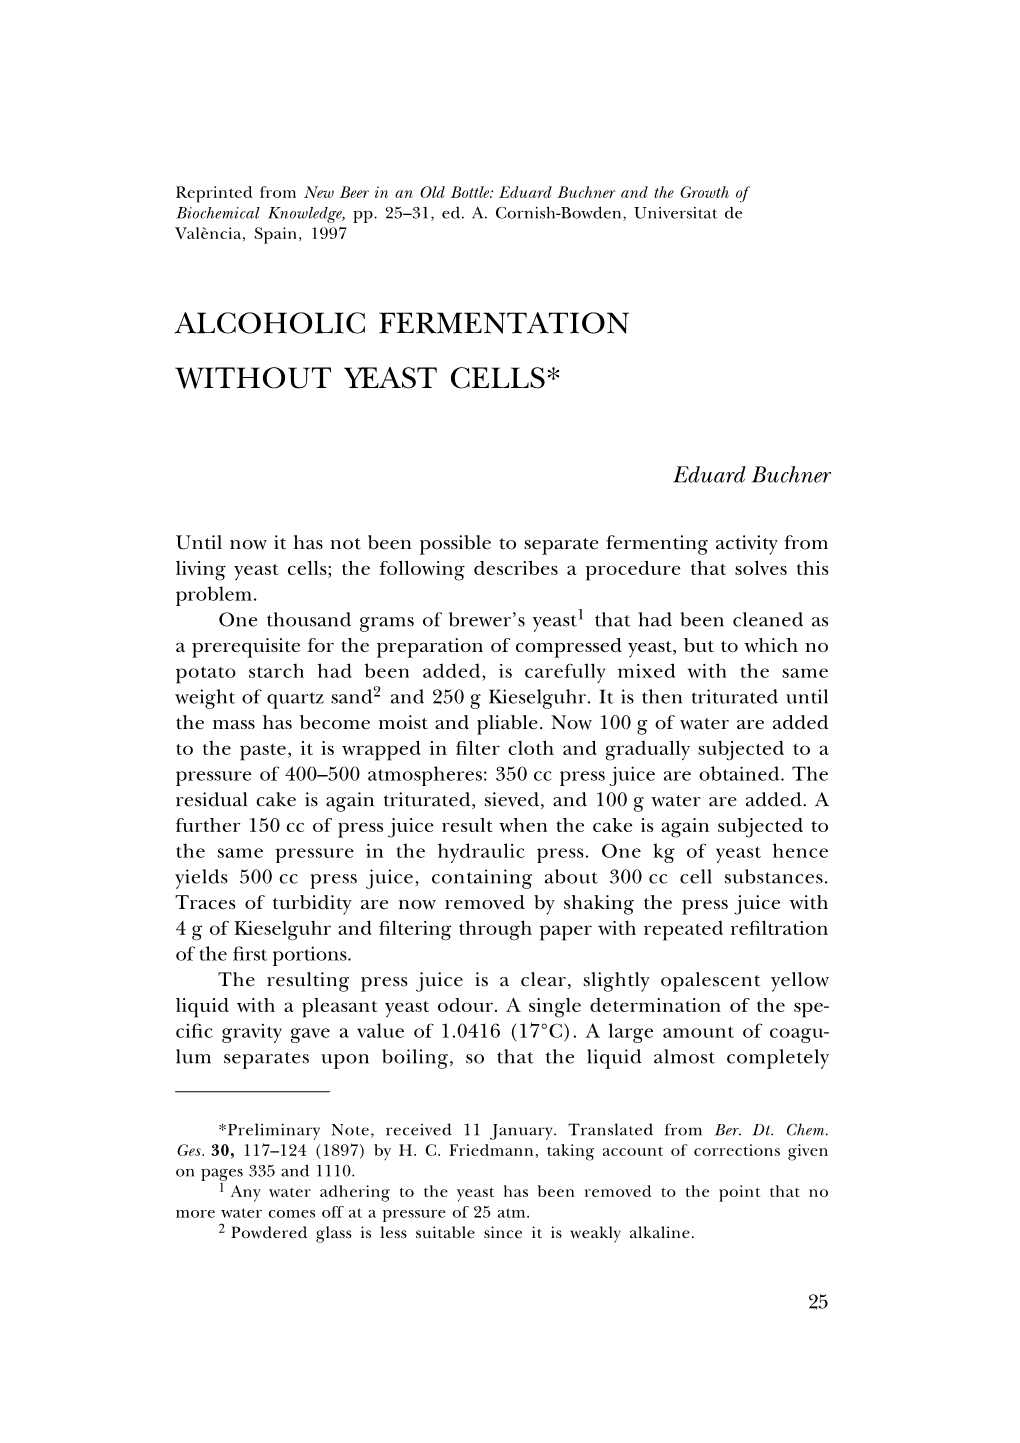 Alcoholic Fermentation Without Yeast Cells*